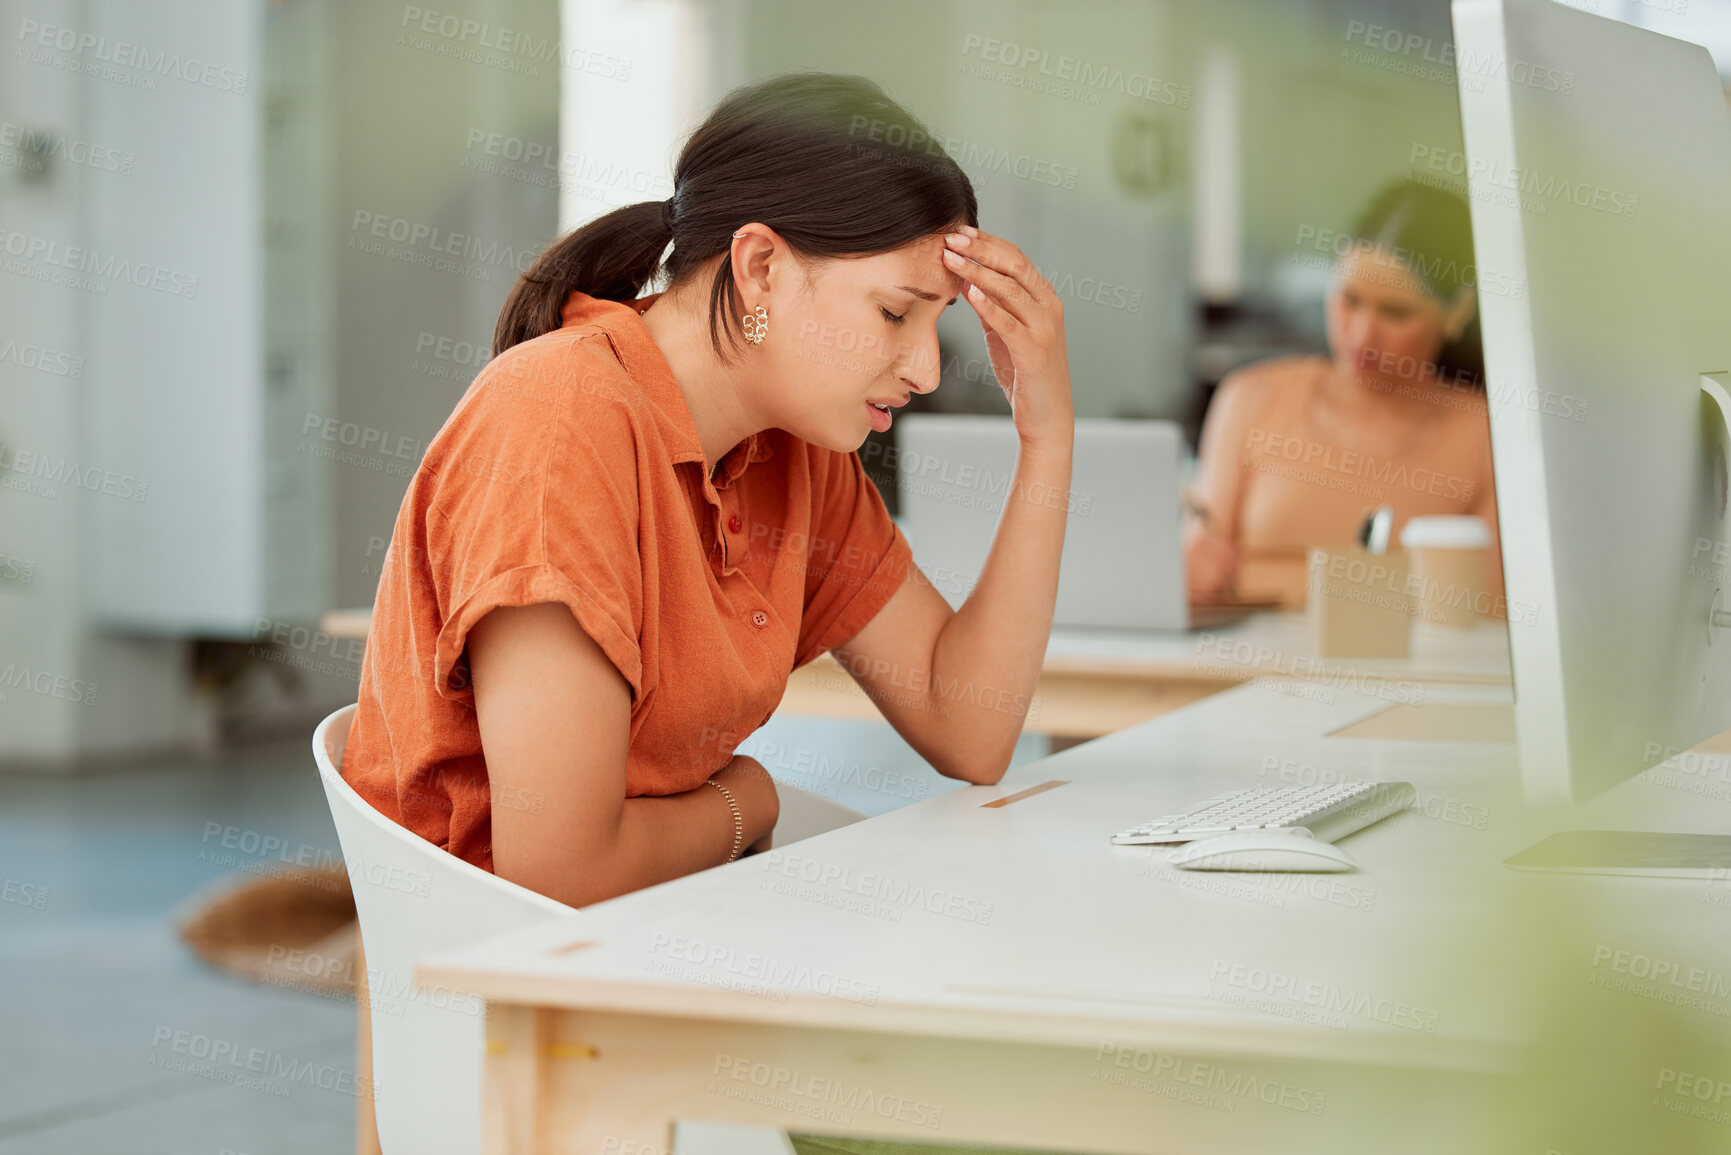 Buy stock photo One hispanic business woman suffering with headache and holding sore tummy while feeling ill with menstrual stomach cramps in an office. Hungry employee on period getting sick, bloated and uncomfortable with digestive pain caused by stress and anxiety